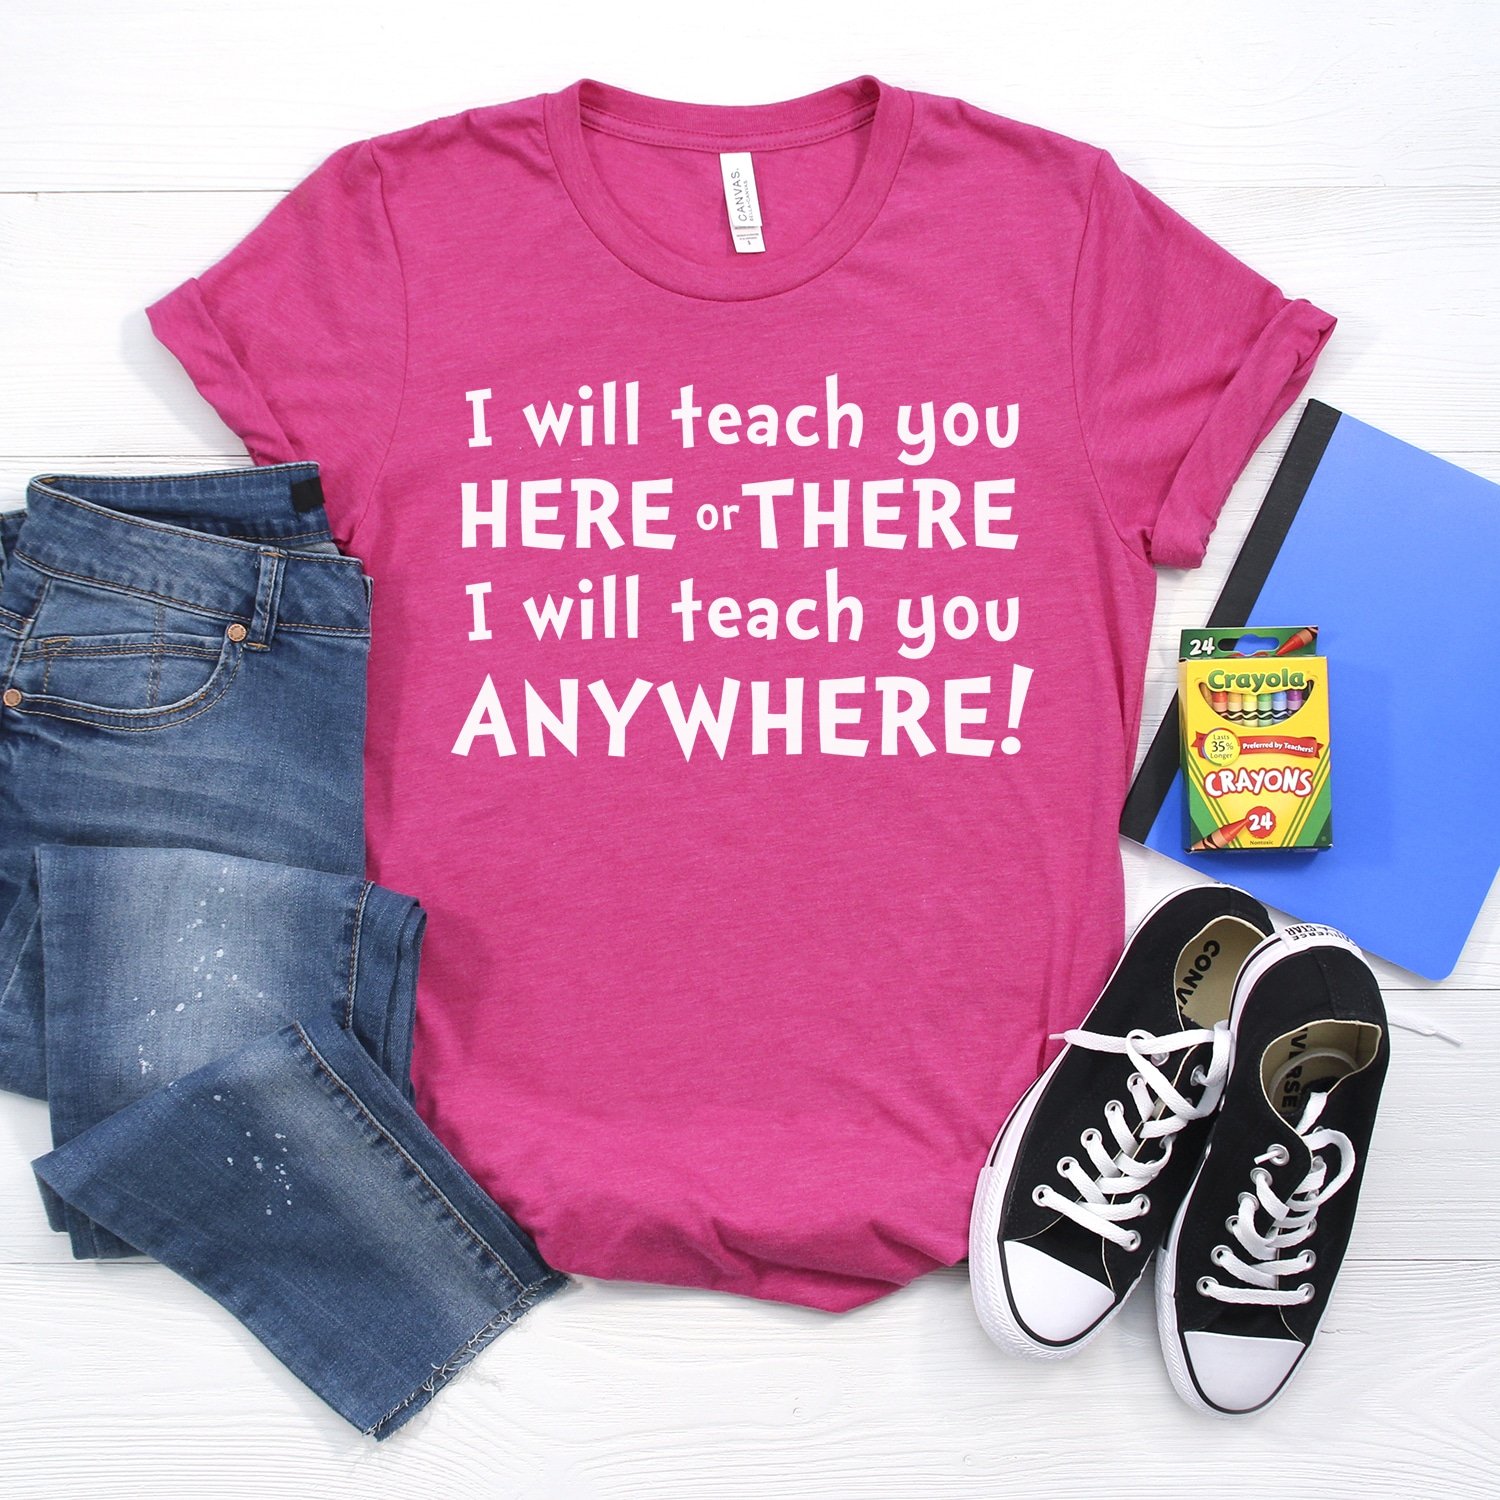 Dr Seuss shirt for teachers with stylized accessories